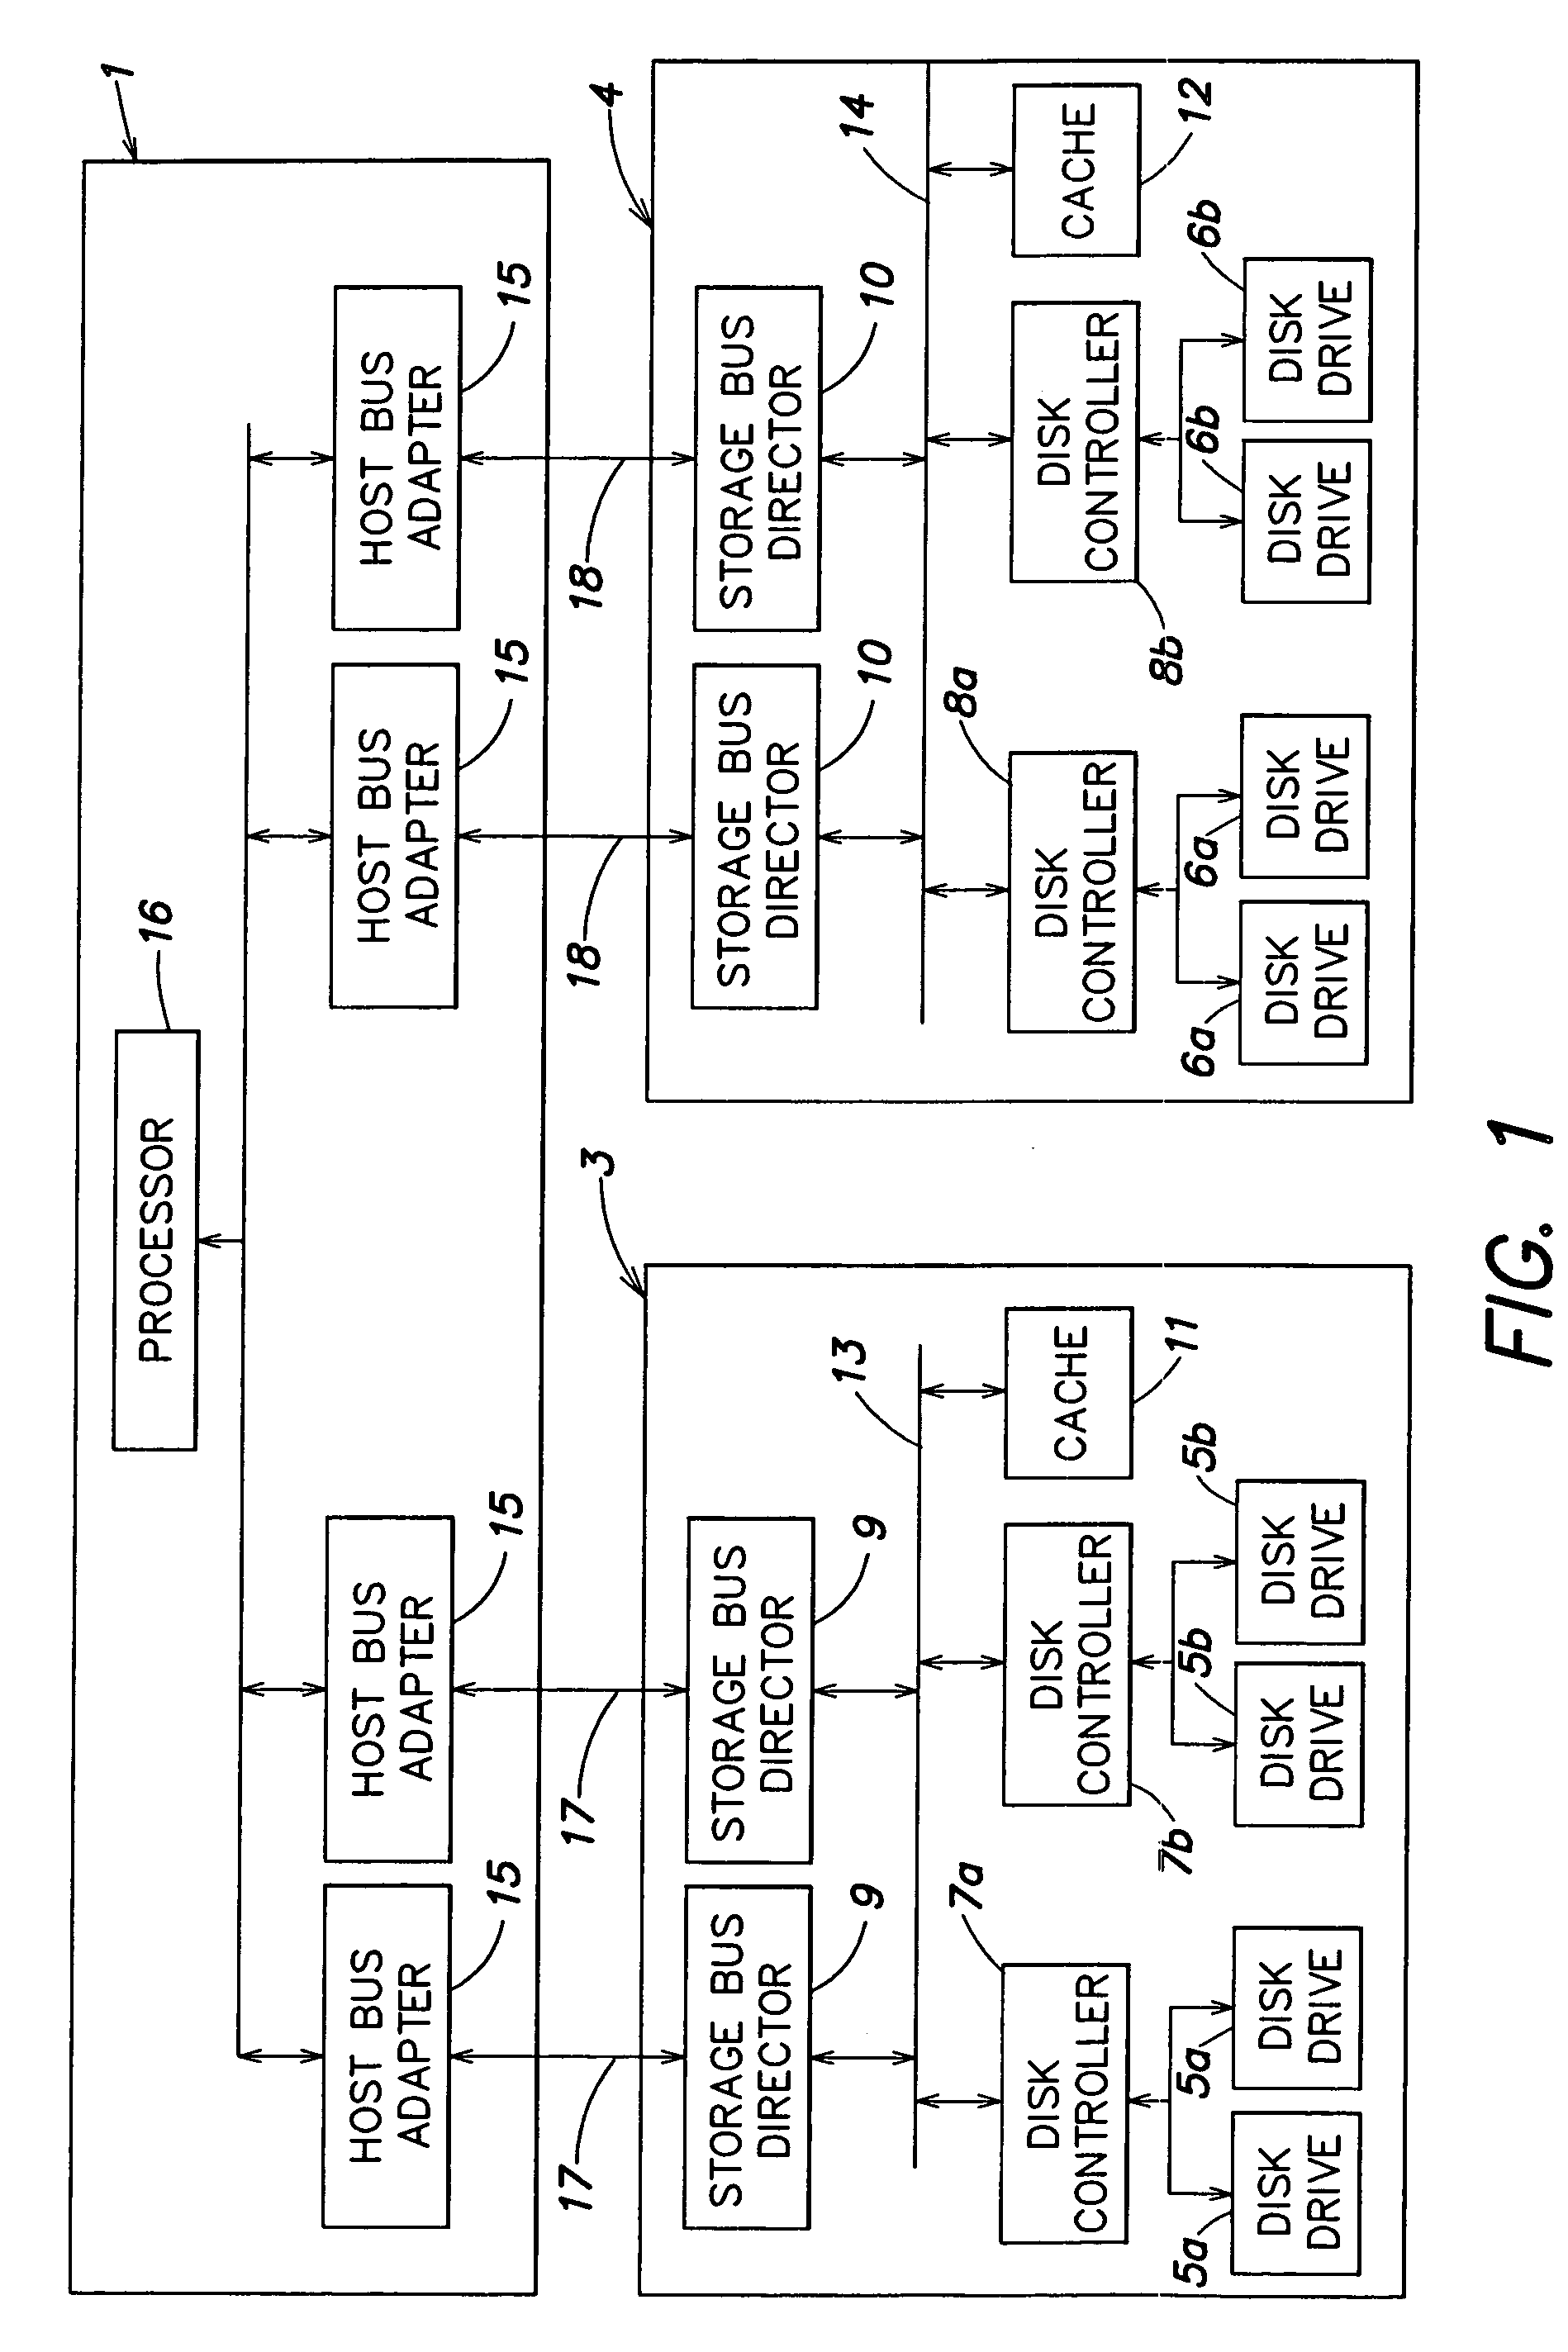 Method and apparatus for undoing a data migration in a computer system